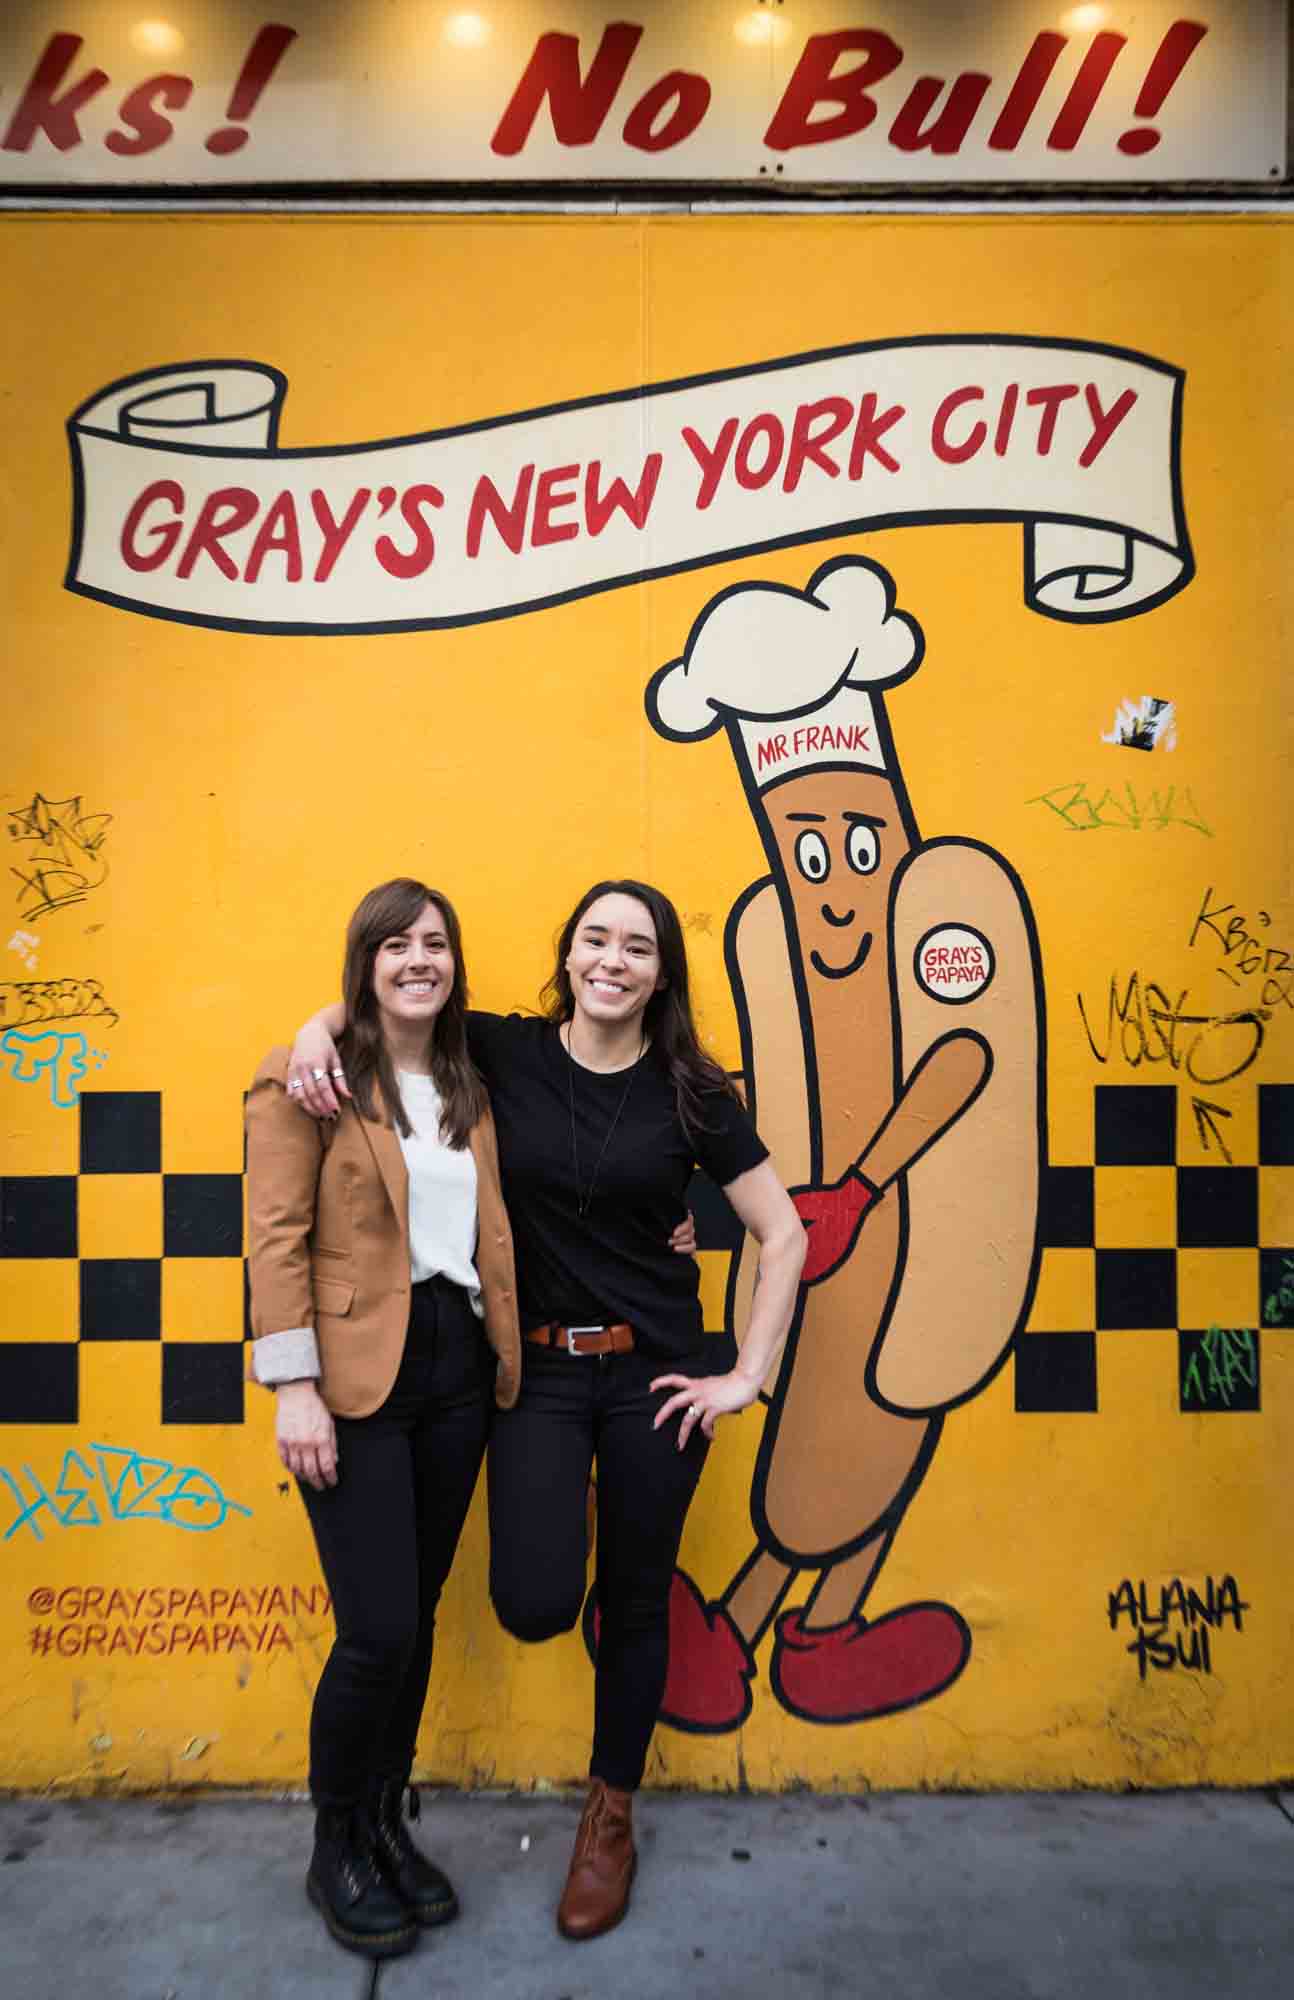 Two women hugging in front of the image of a cartoon hot dog character